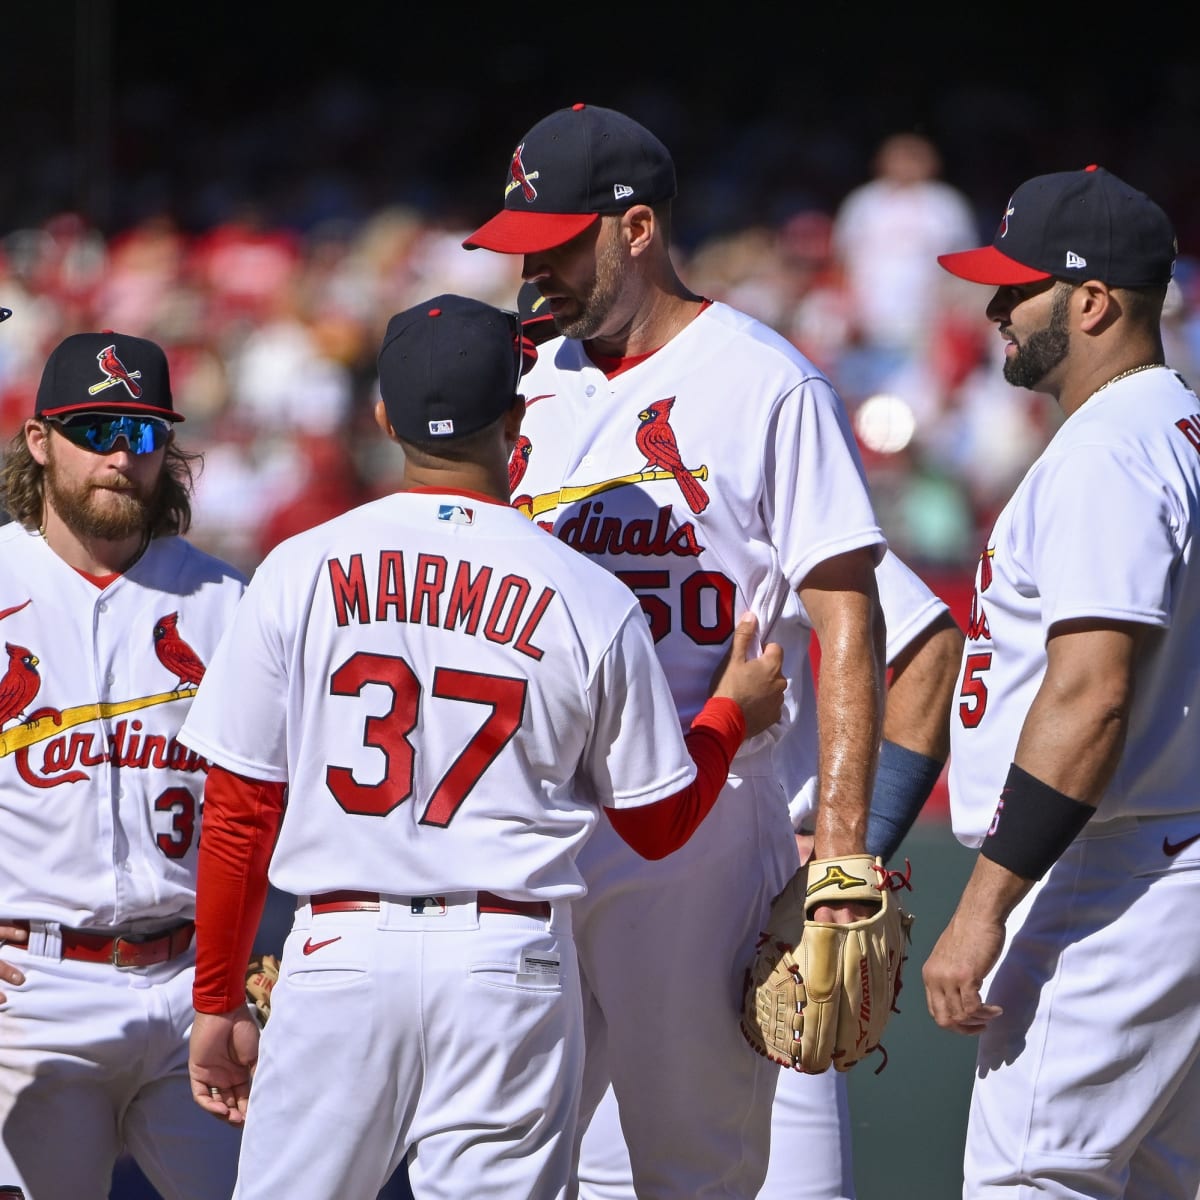 New season. New rules. New lineup. The Cardinals are set for Opening Day